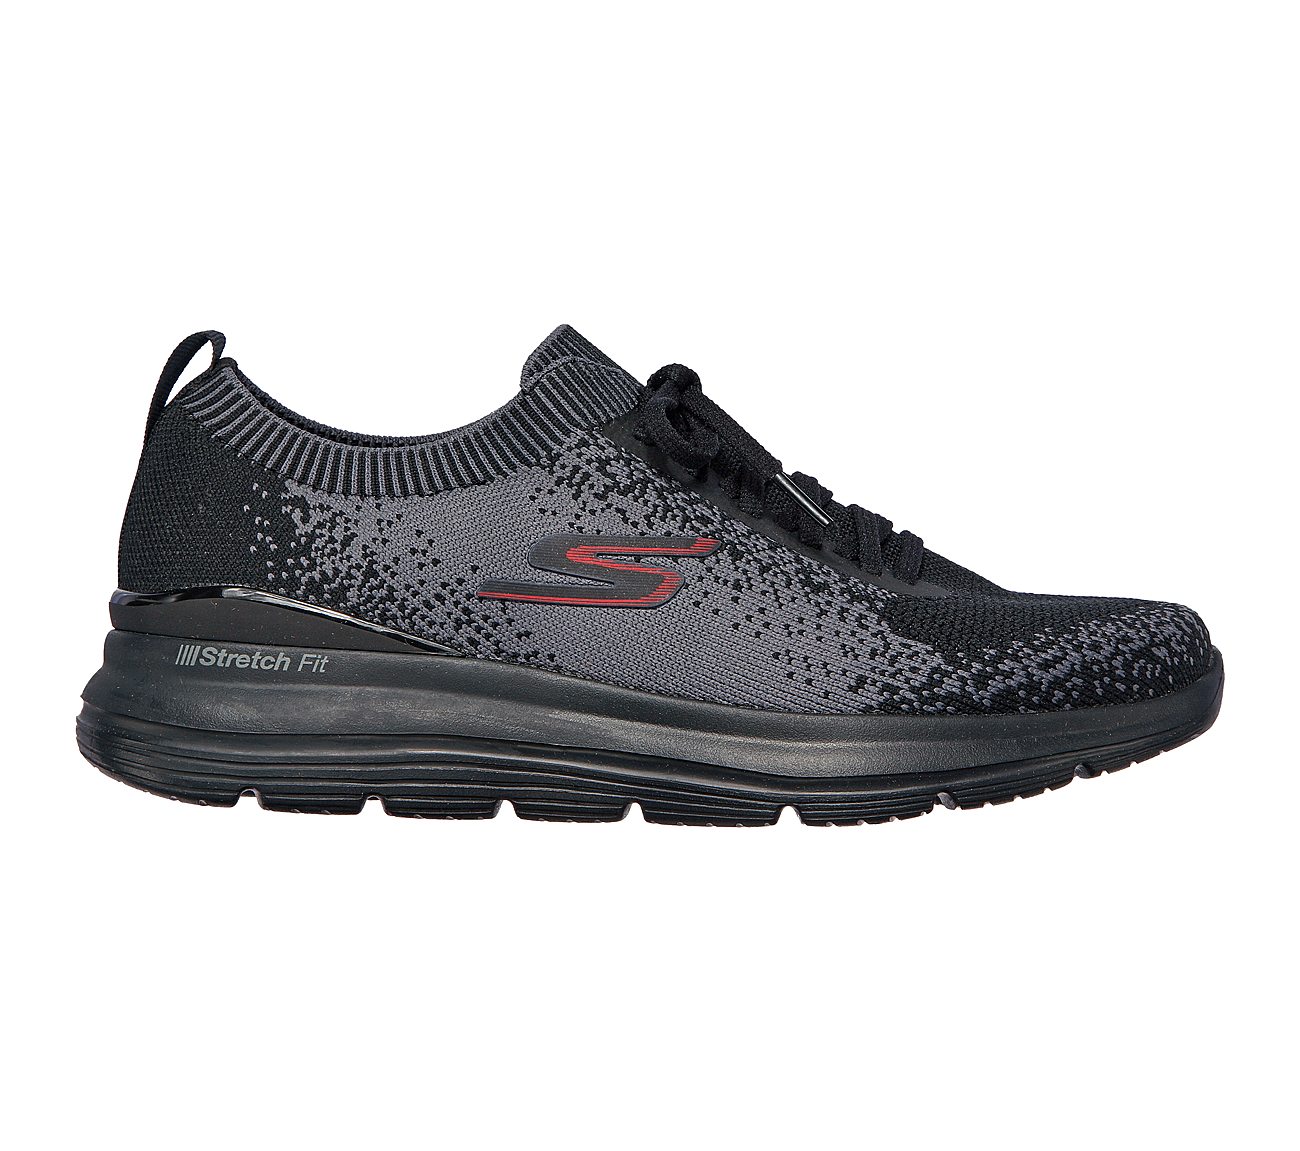 skechers stretch fit shoes